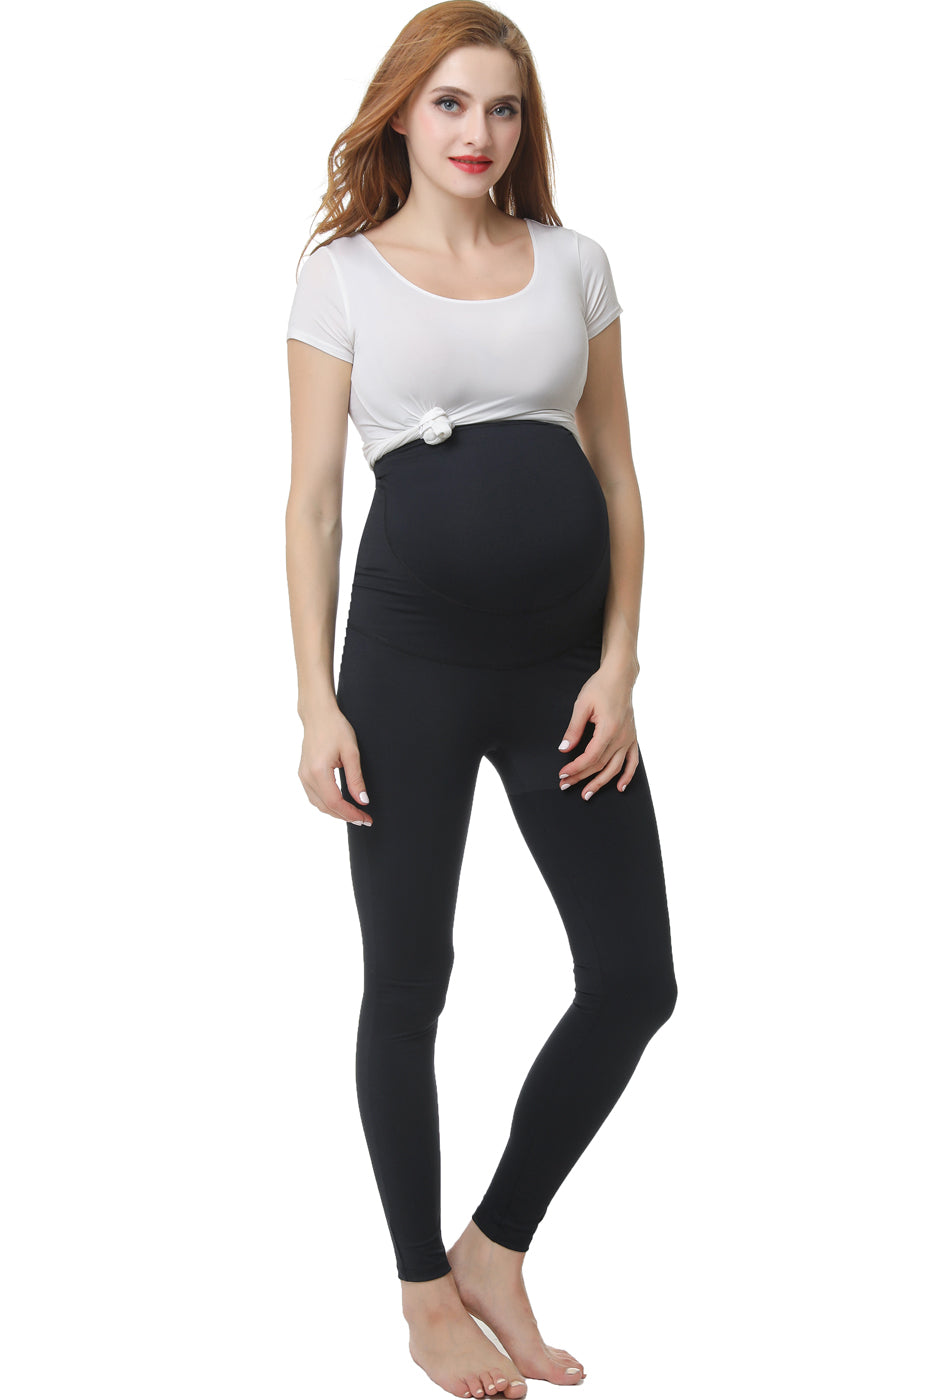 Women Maternity Compression Leggings Over The Belly Full Length Pregnancy  Pants